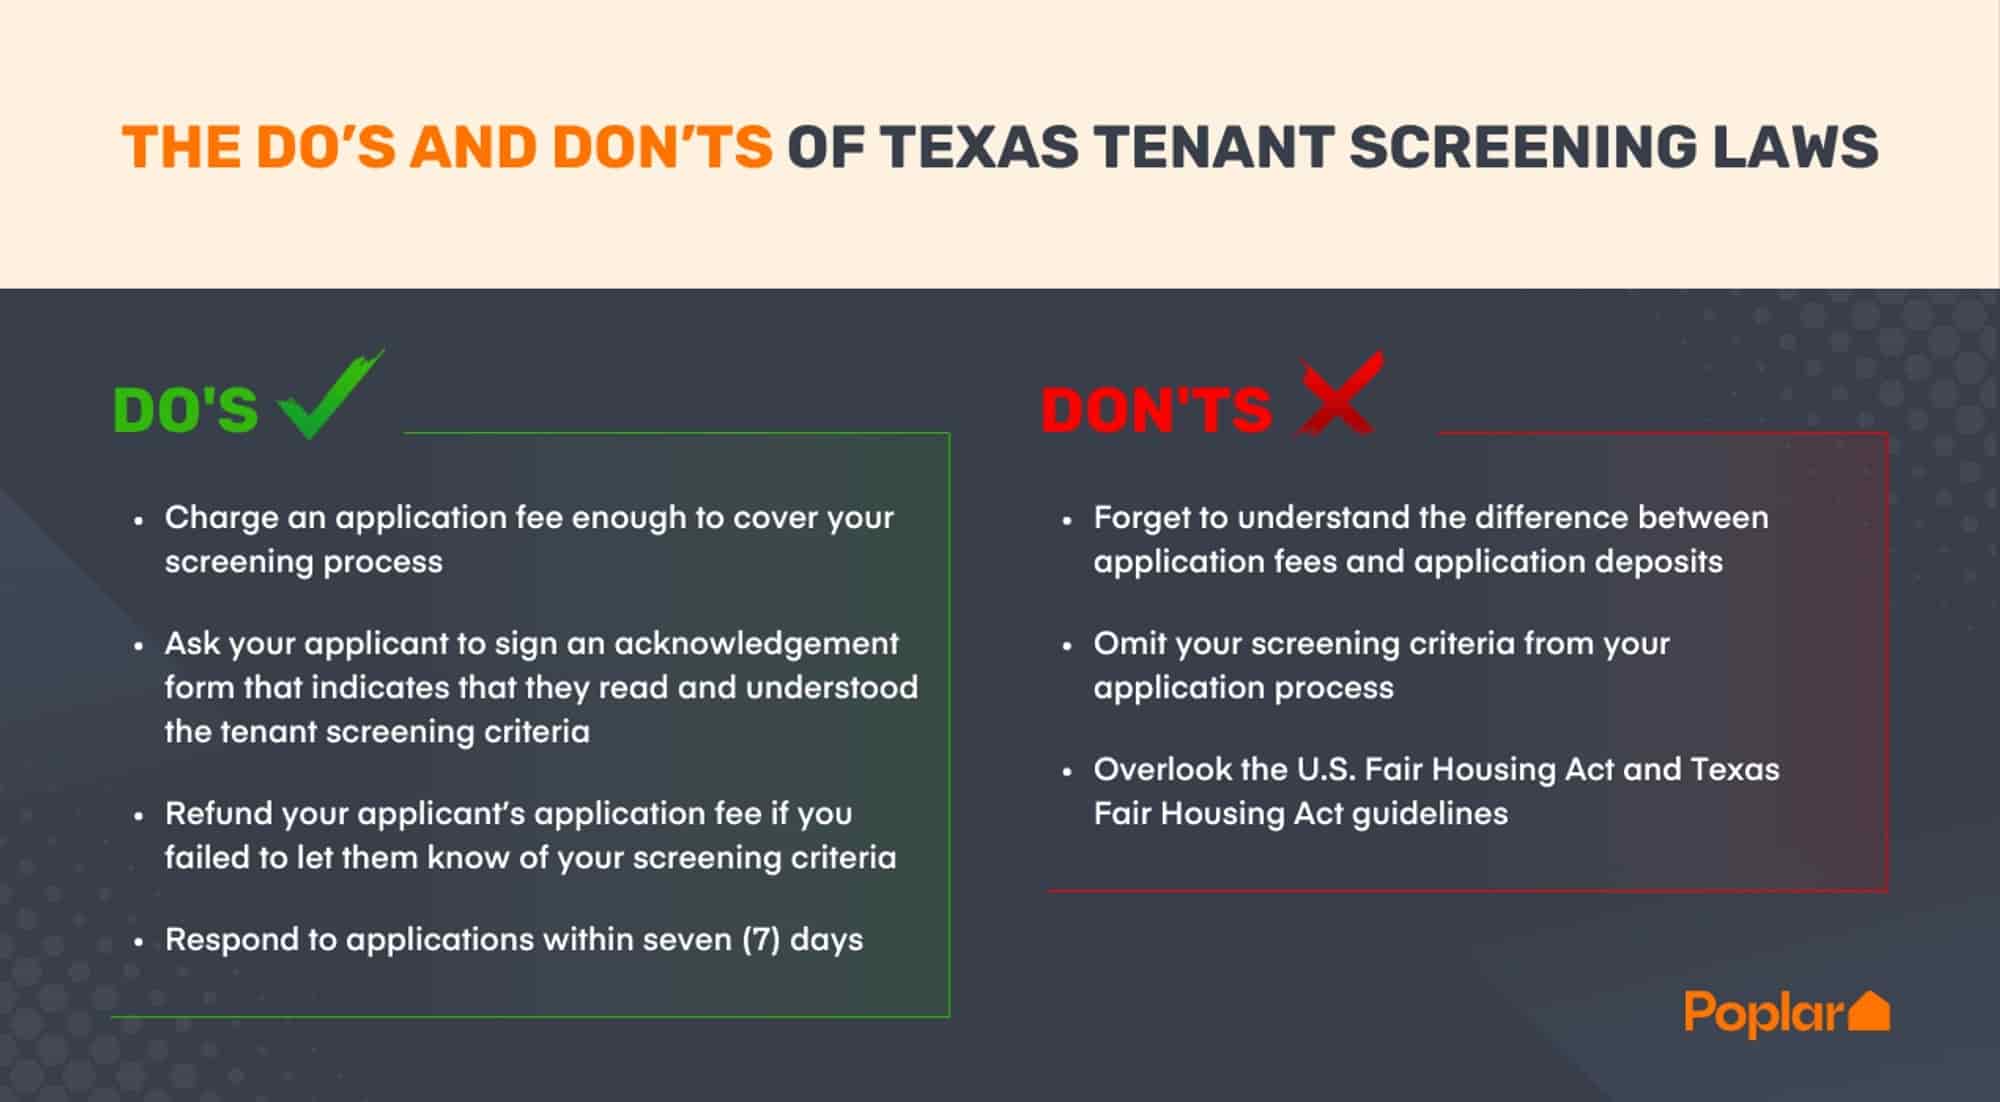 The do's and don'ts of Texas tenant screening laws chart comparison